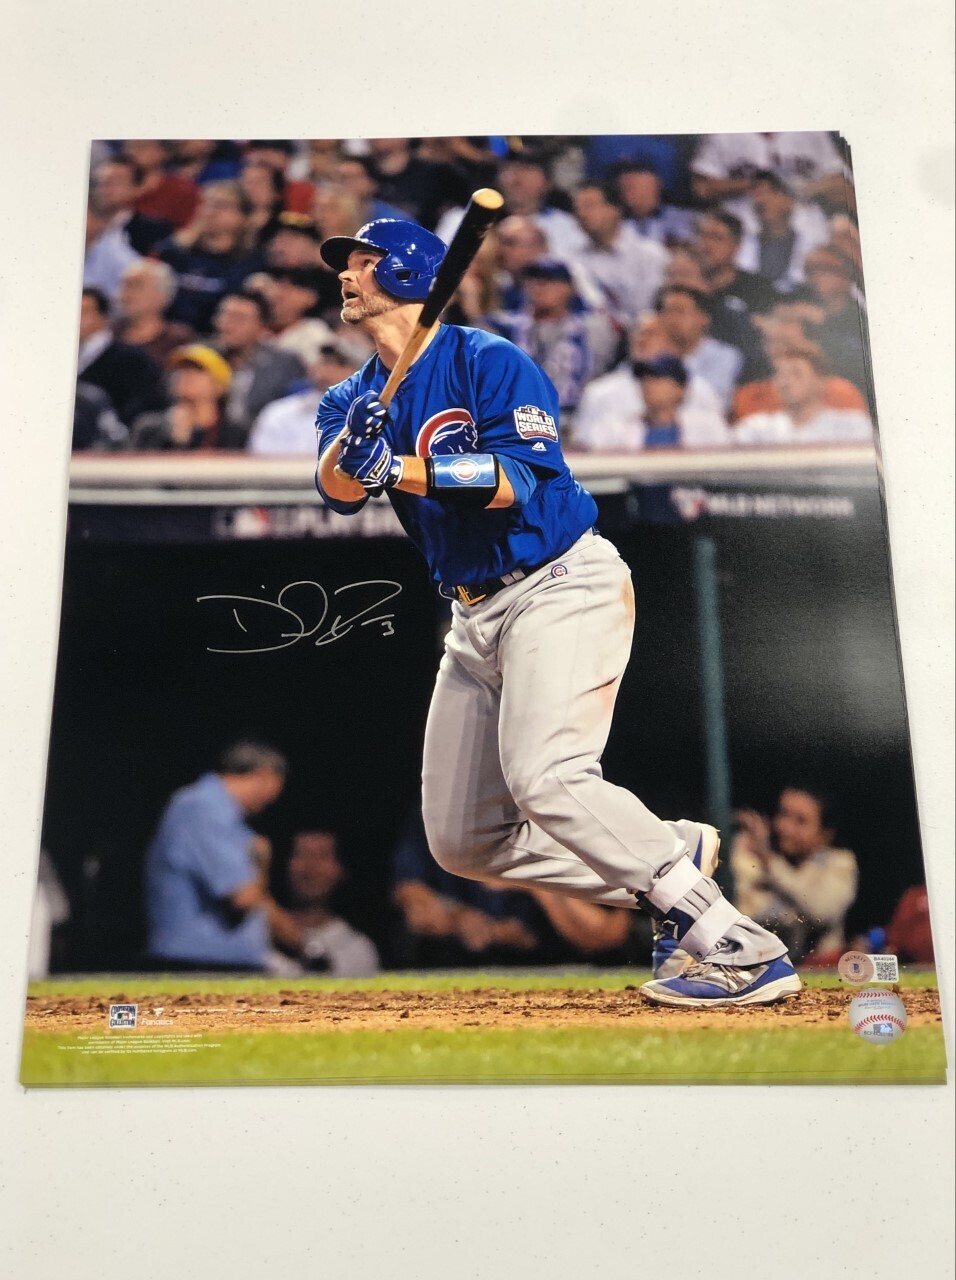 David Ross Signed Licensed 16x20 Photo (Game 7 Home Run)